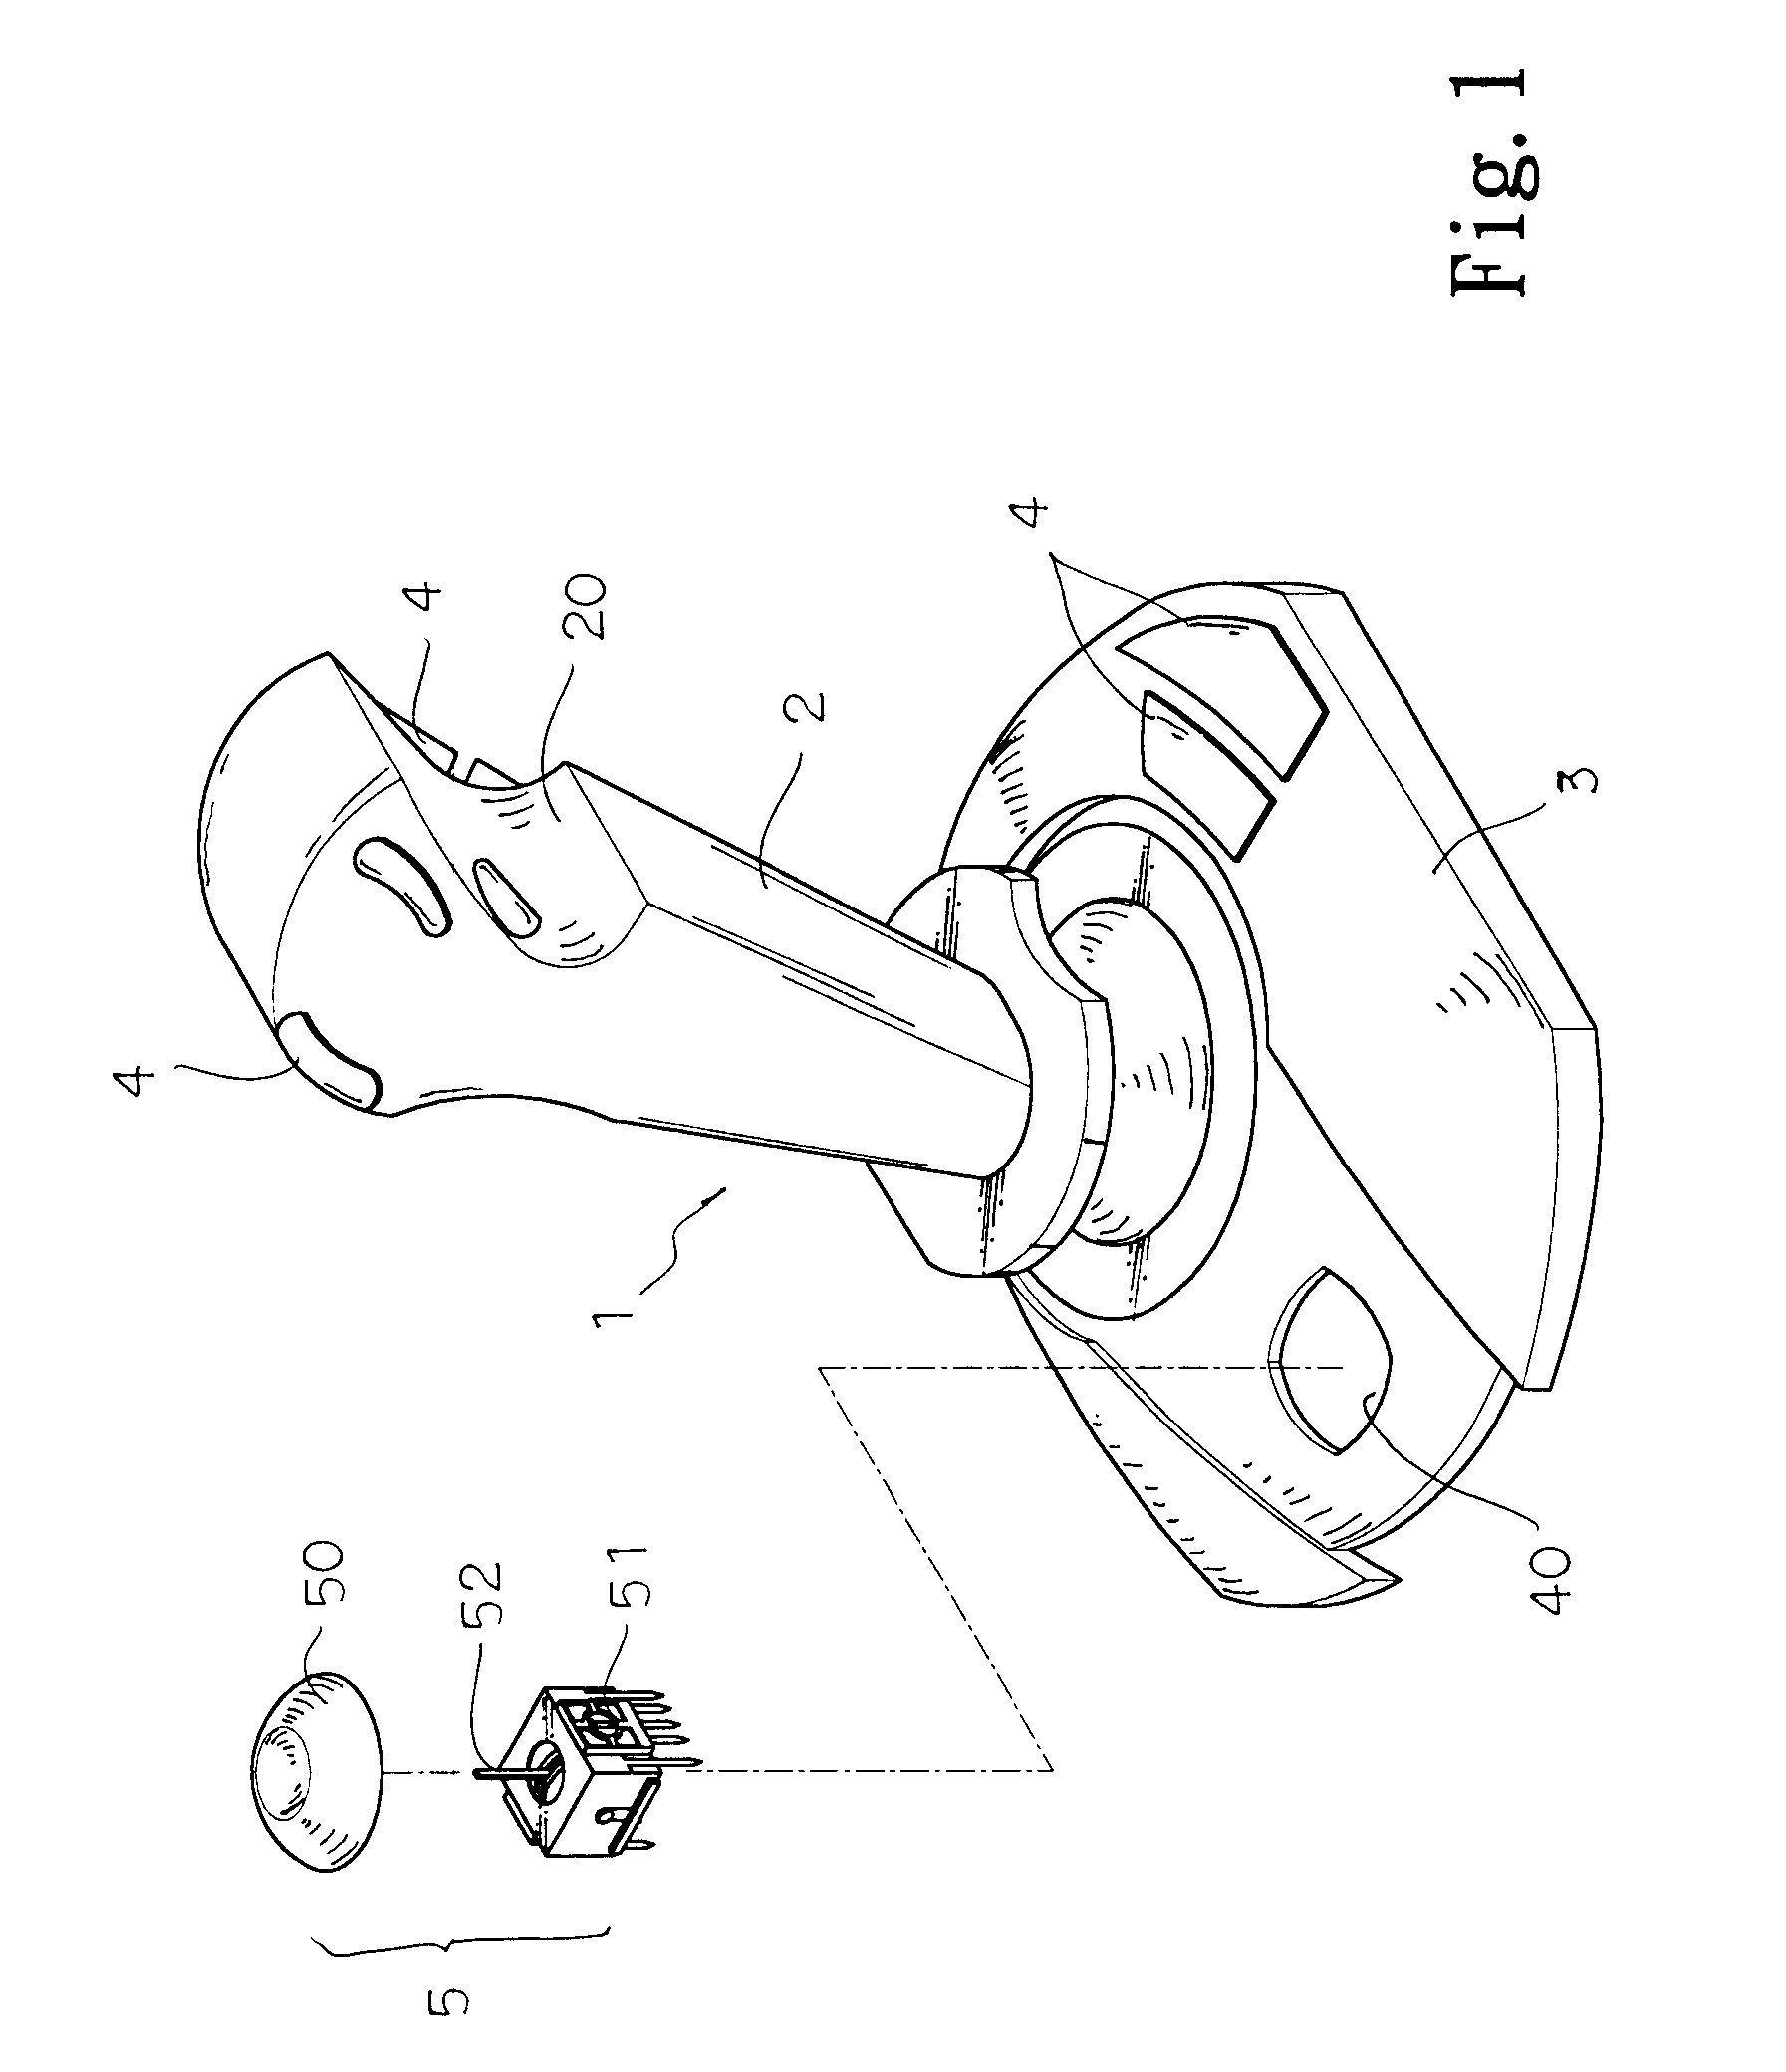 Joystick capable of controlling direction rudder and accelerator synchronously